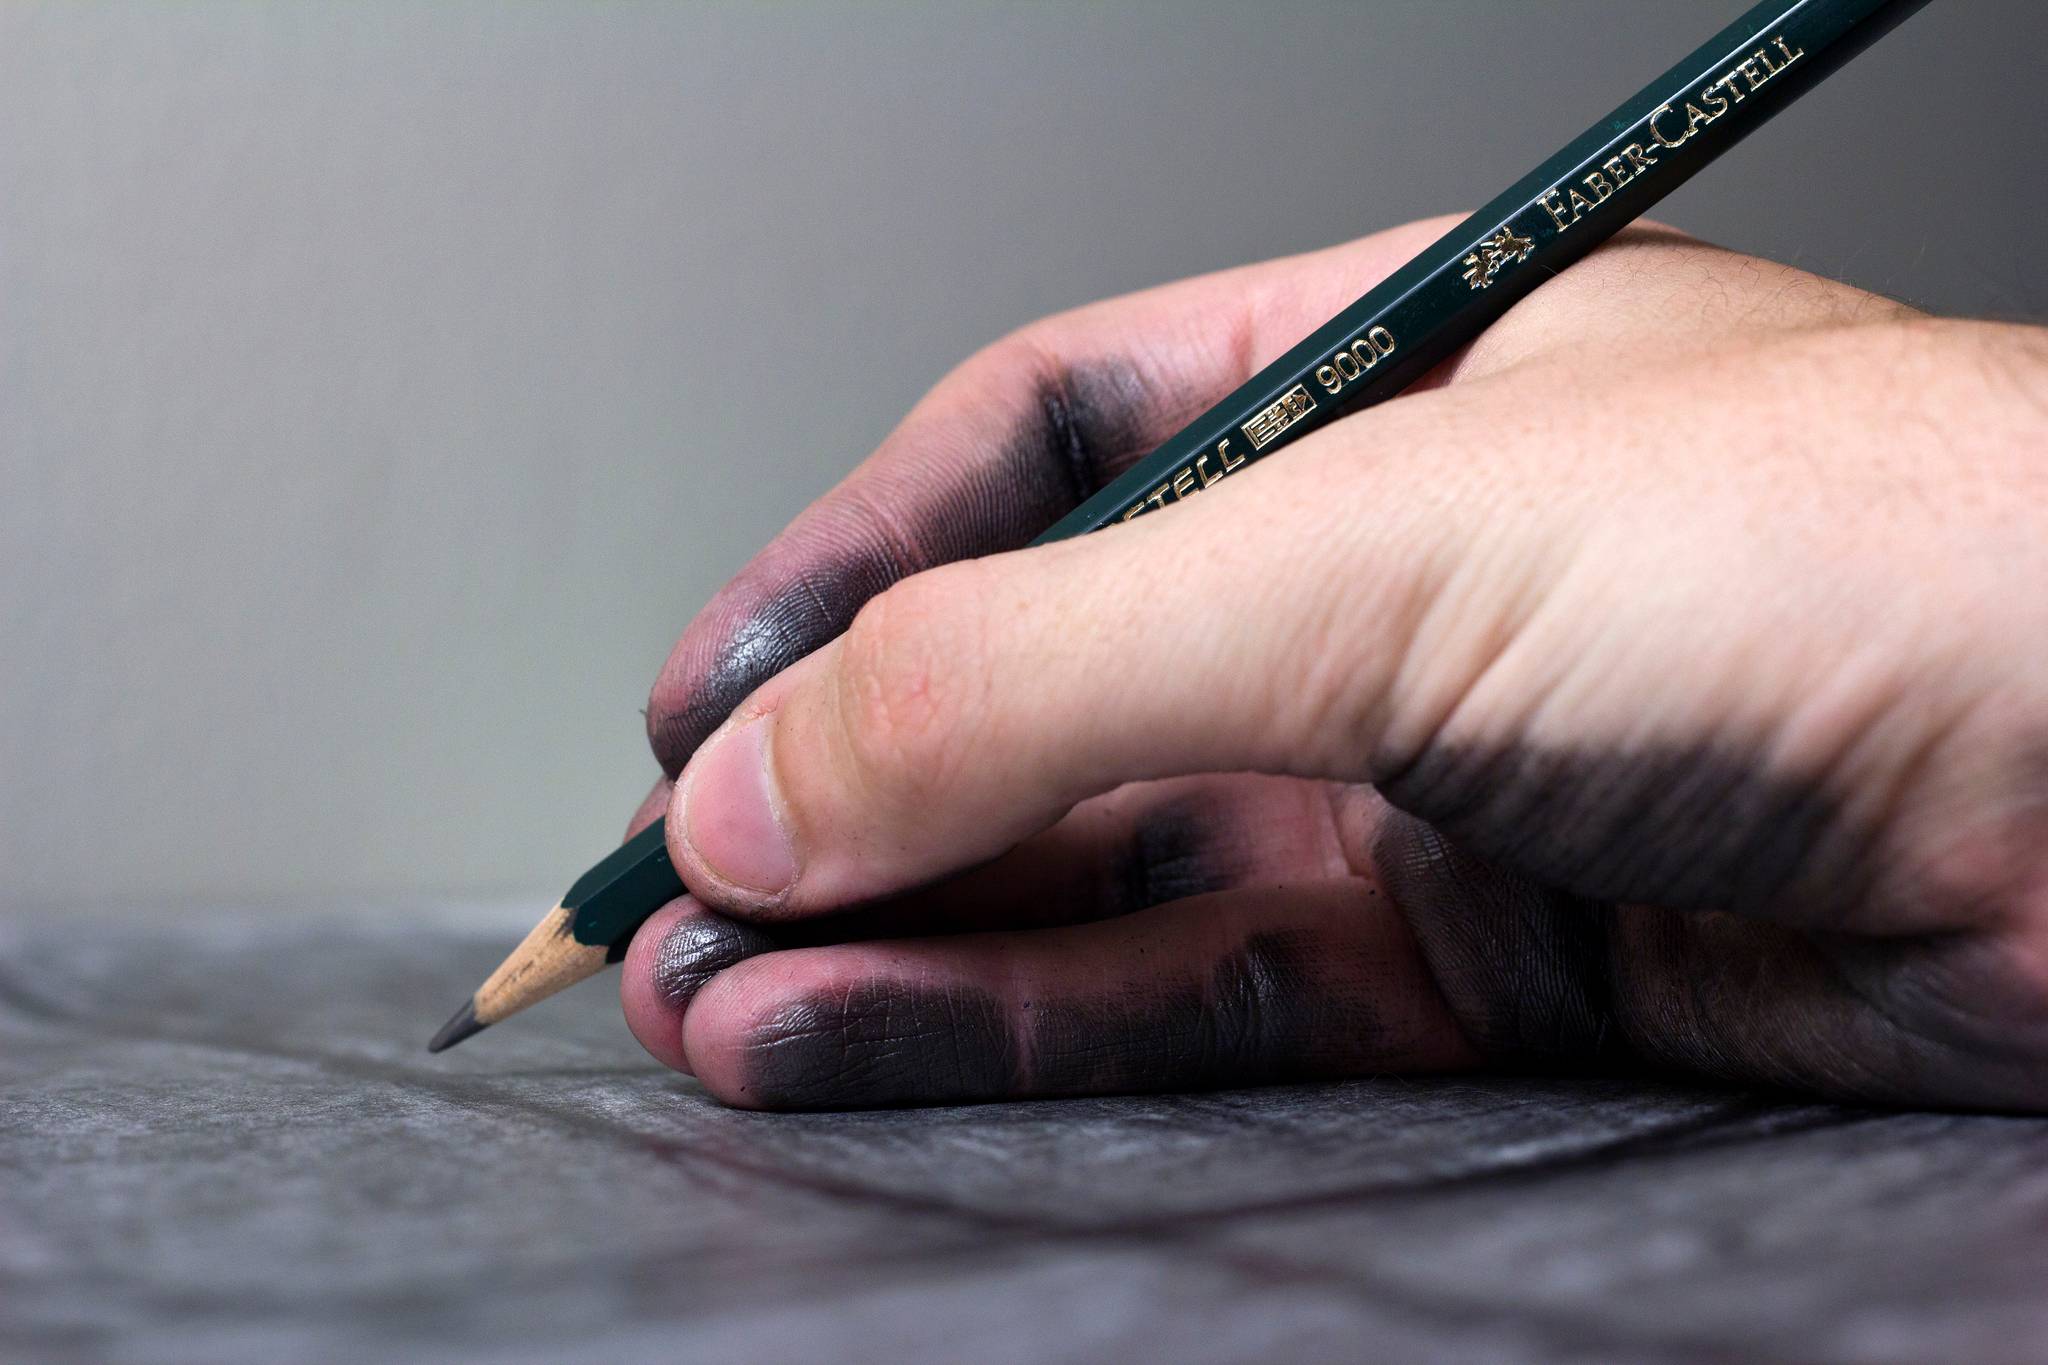 A New York start-up is profiting from pencils